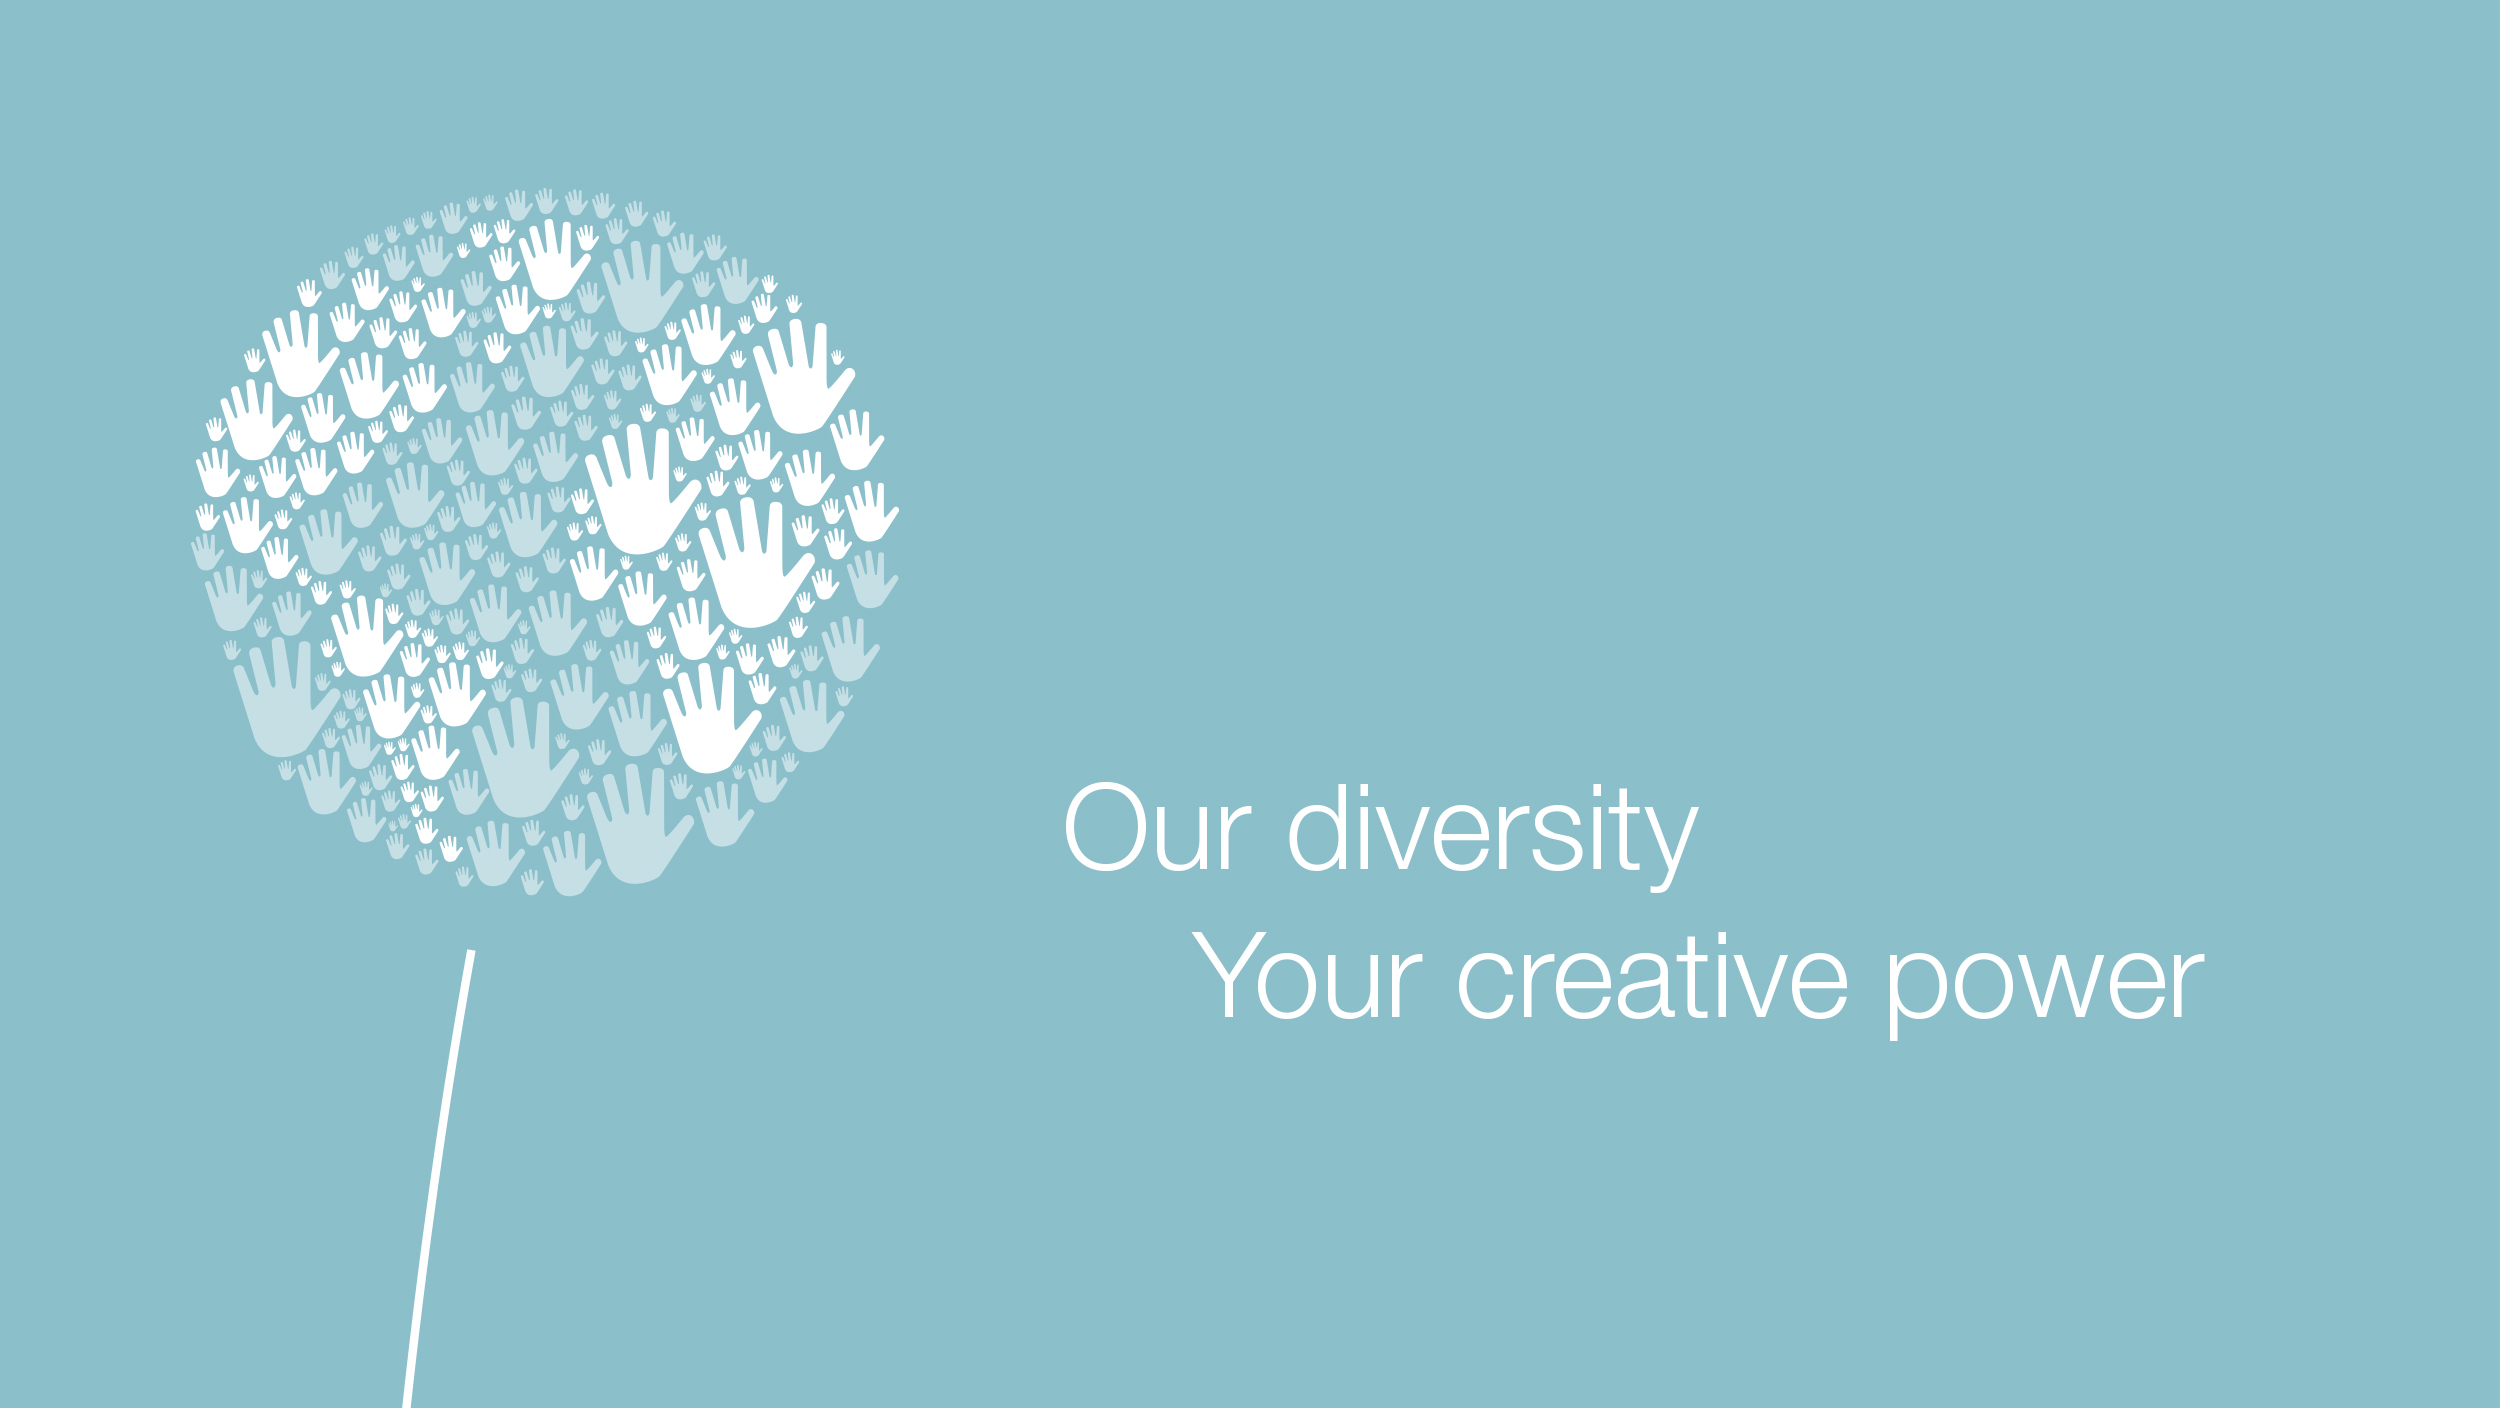 The world is your oyster, as the saying goes: Our diversity Your creative power